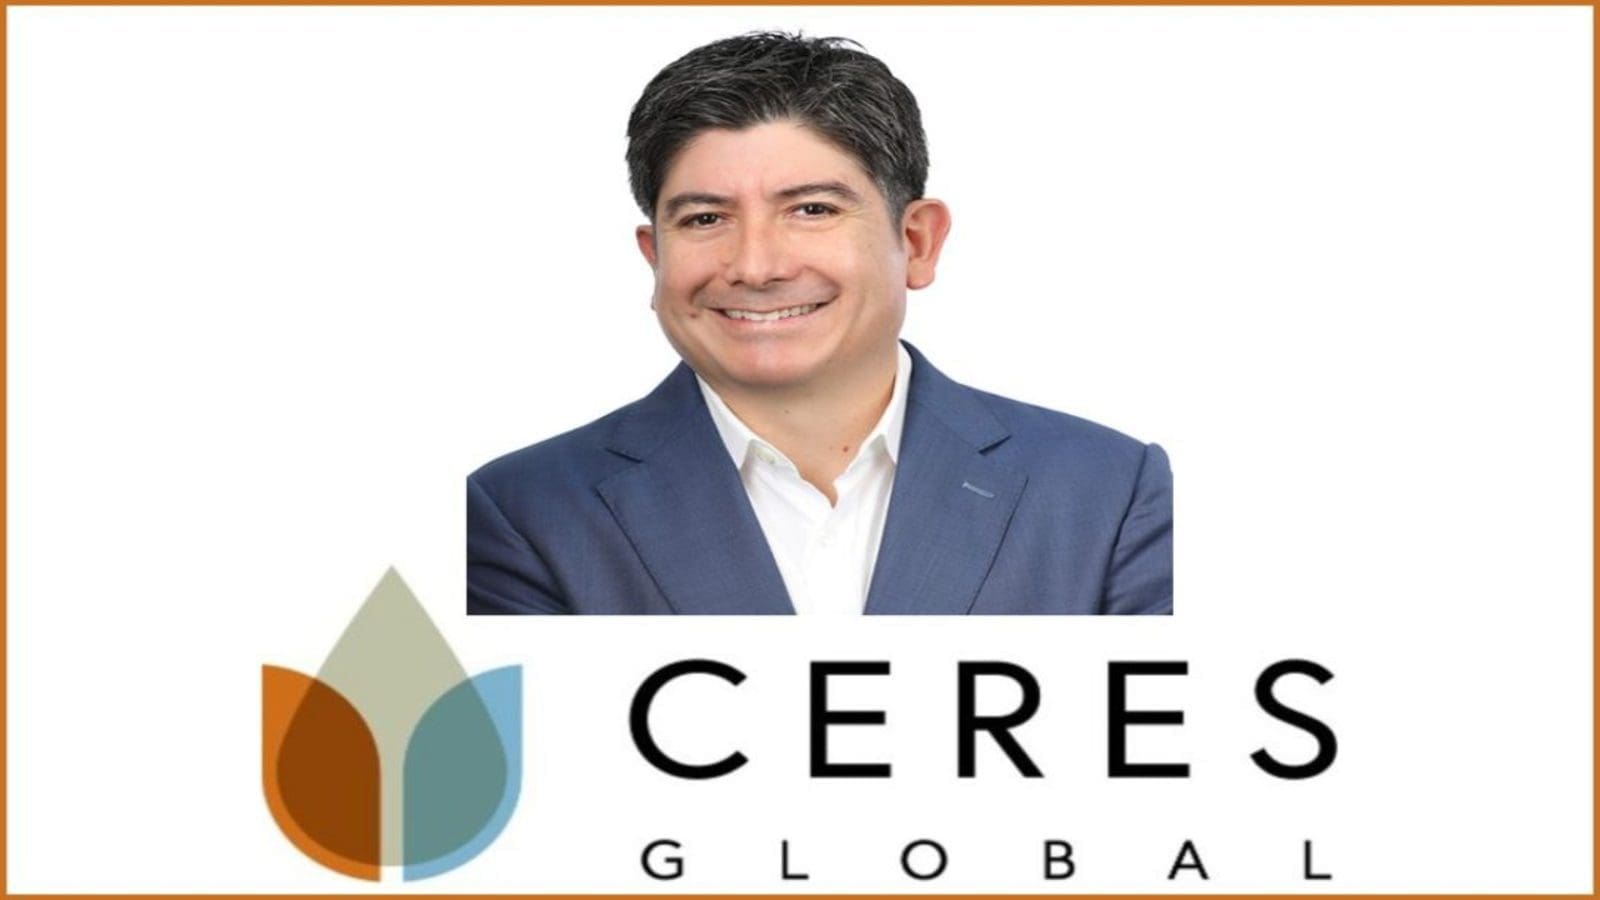 Ceres appoints Carlos Paz new president, CEO